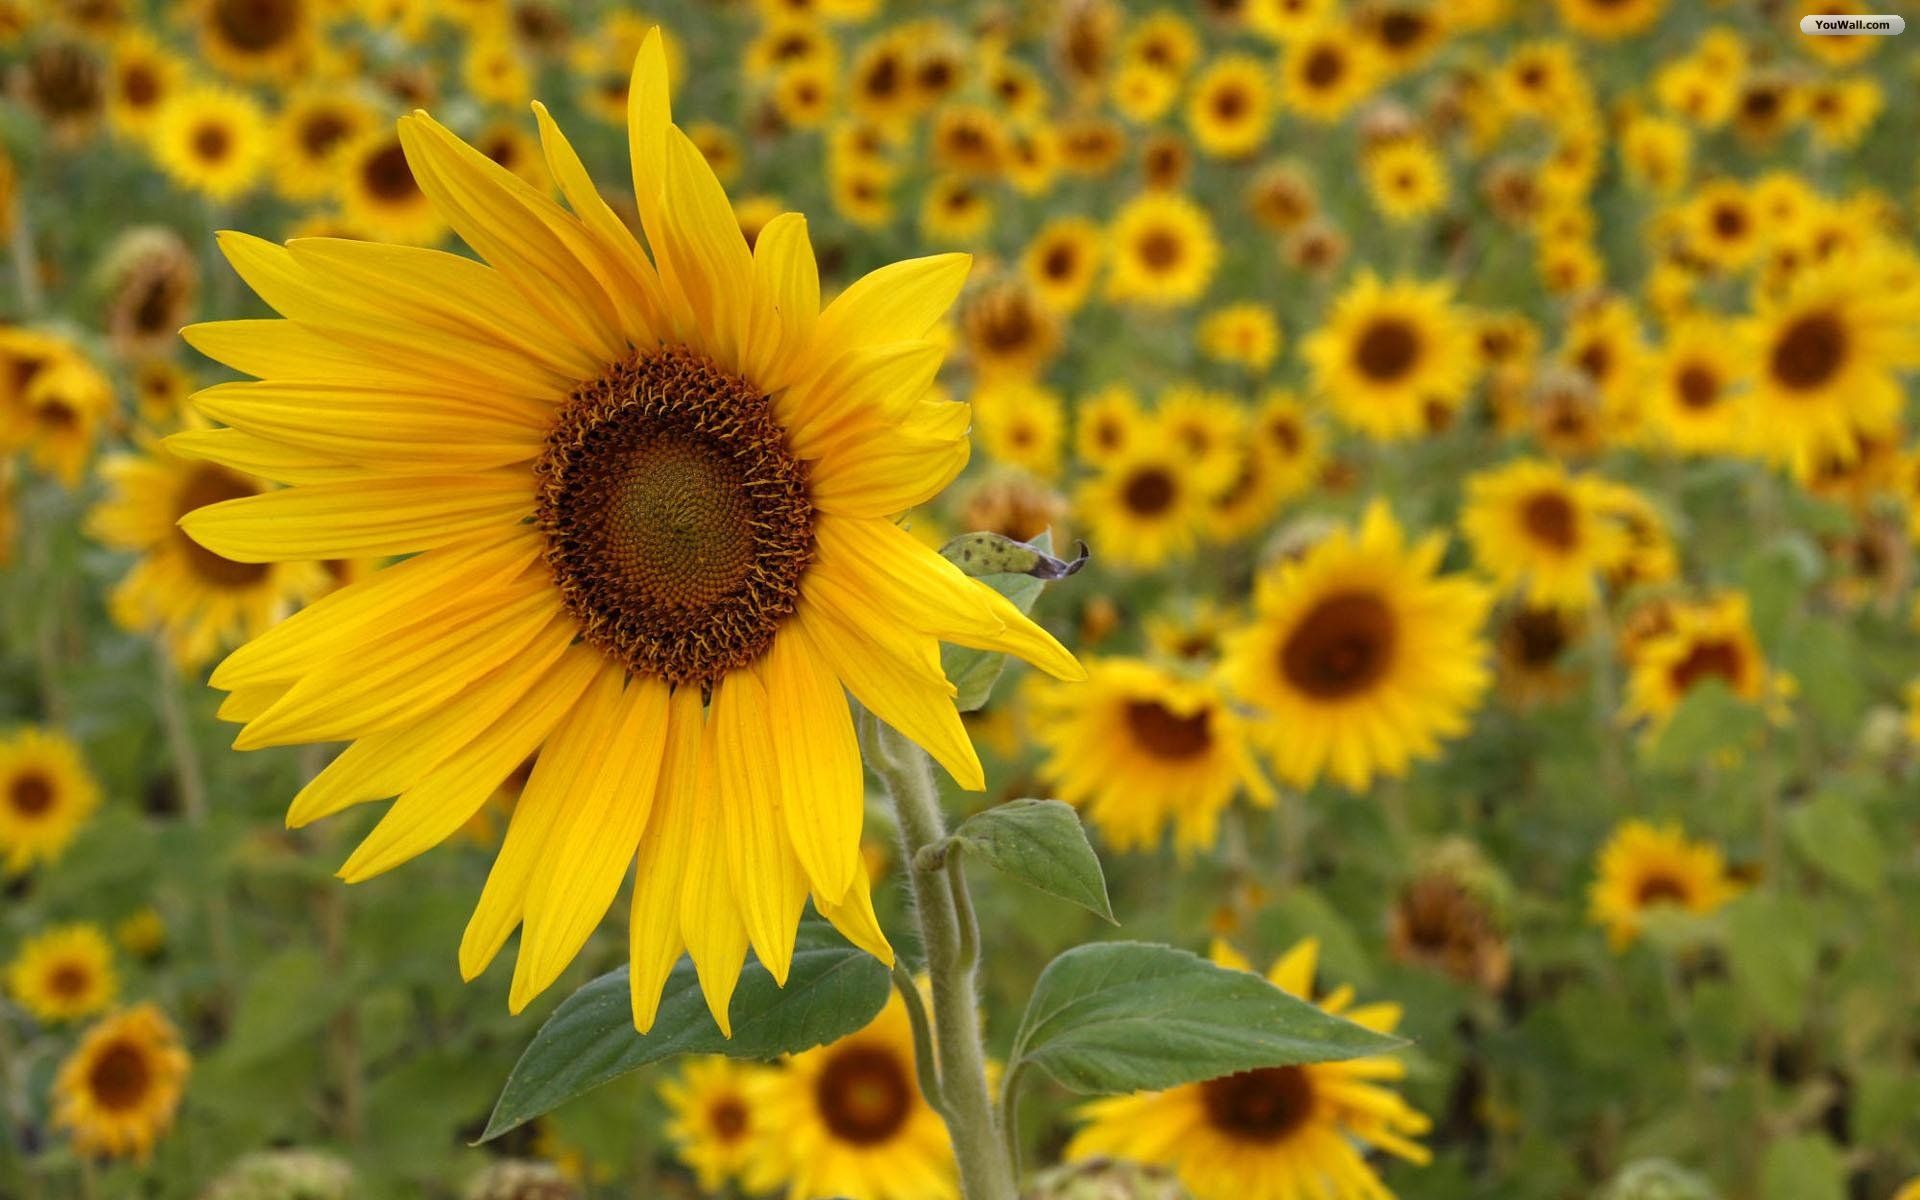 Sunflowers Summer Windows 7 and 8 Theme All for Windows 10 Free